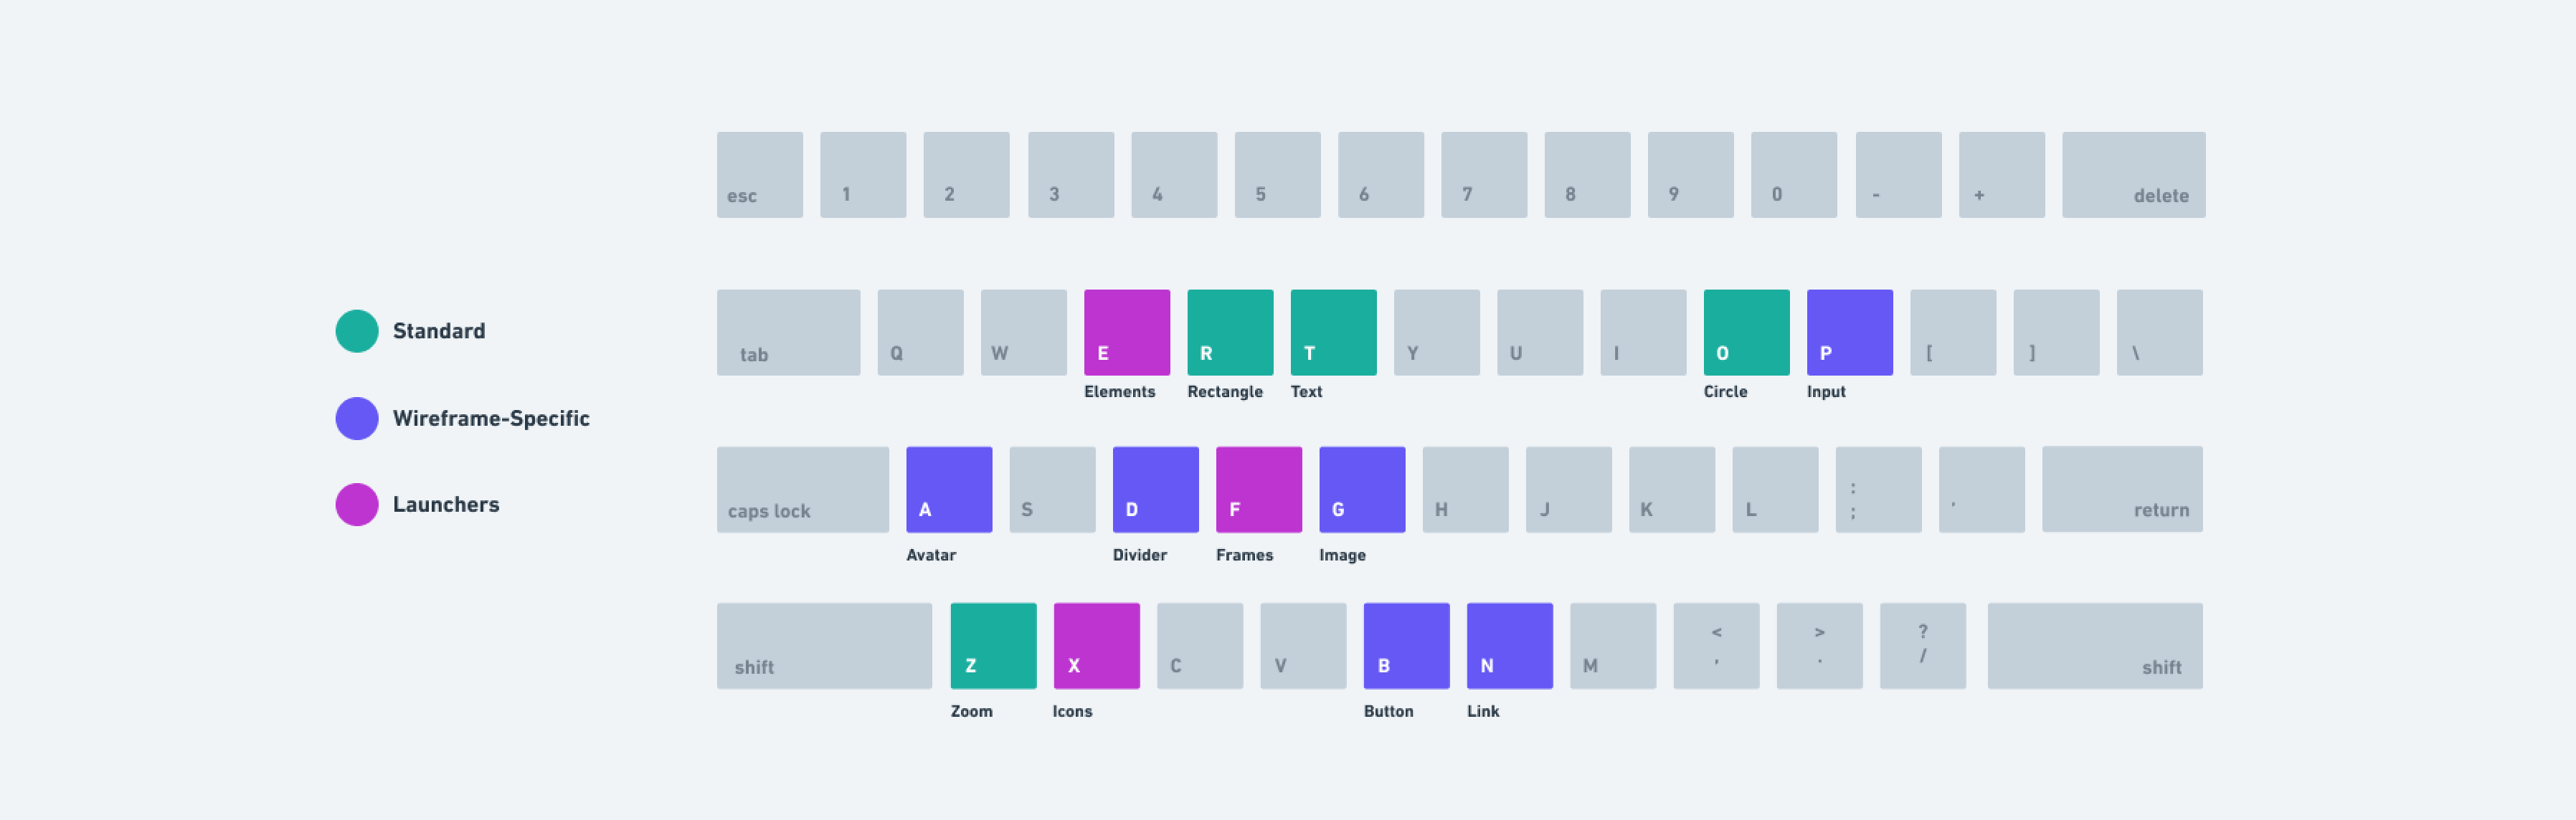 Overview of Wireframe keyboard shortcuts color-coded by category